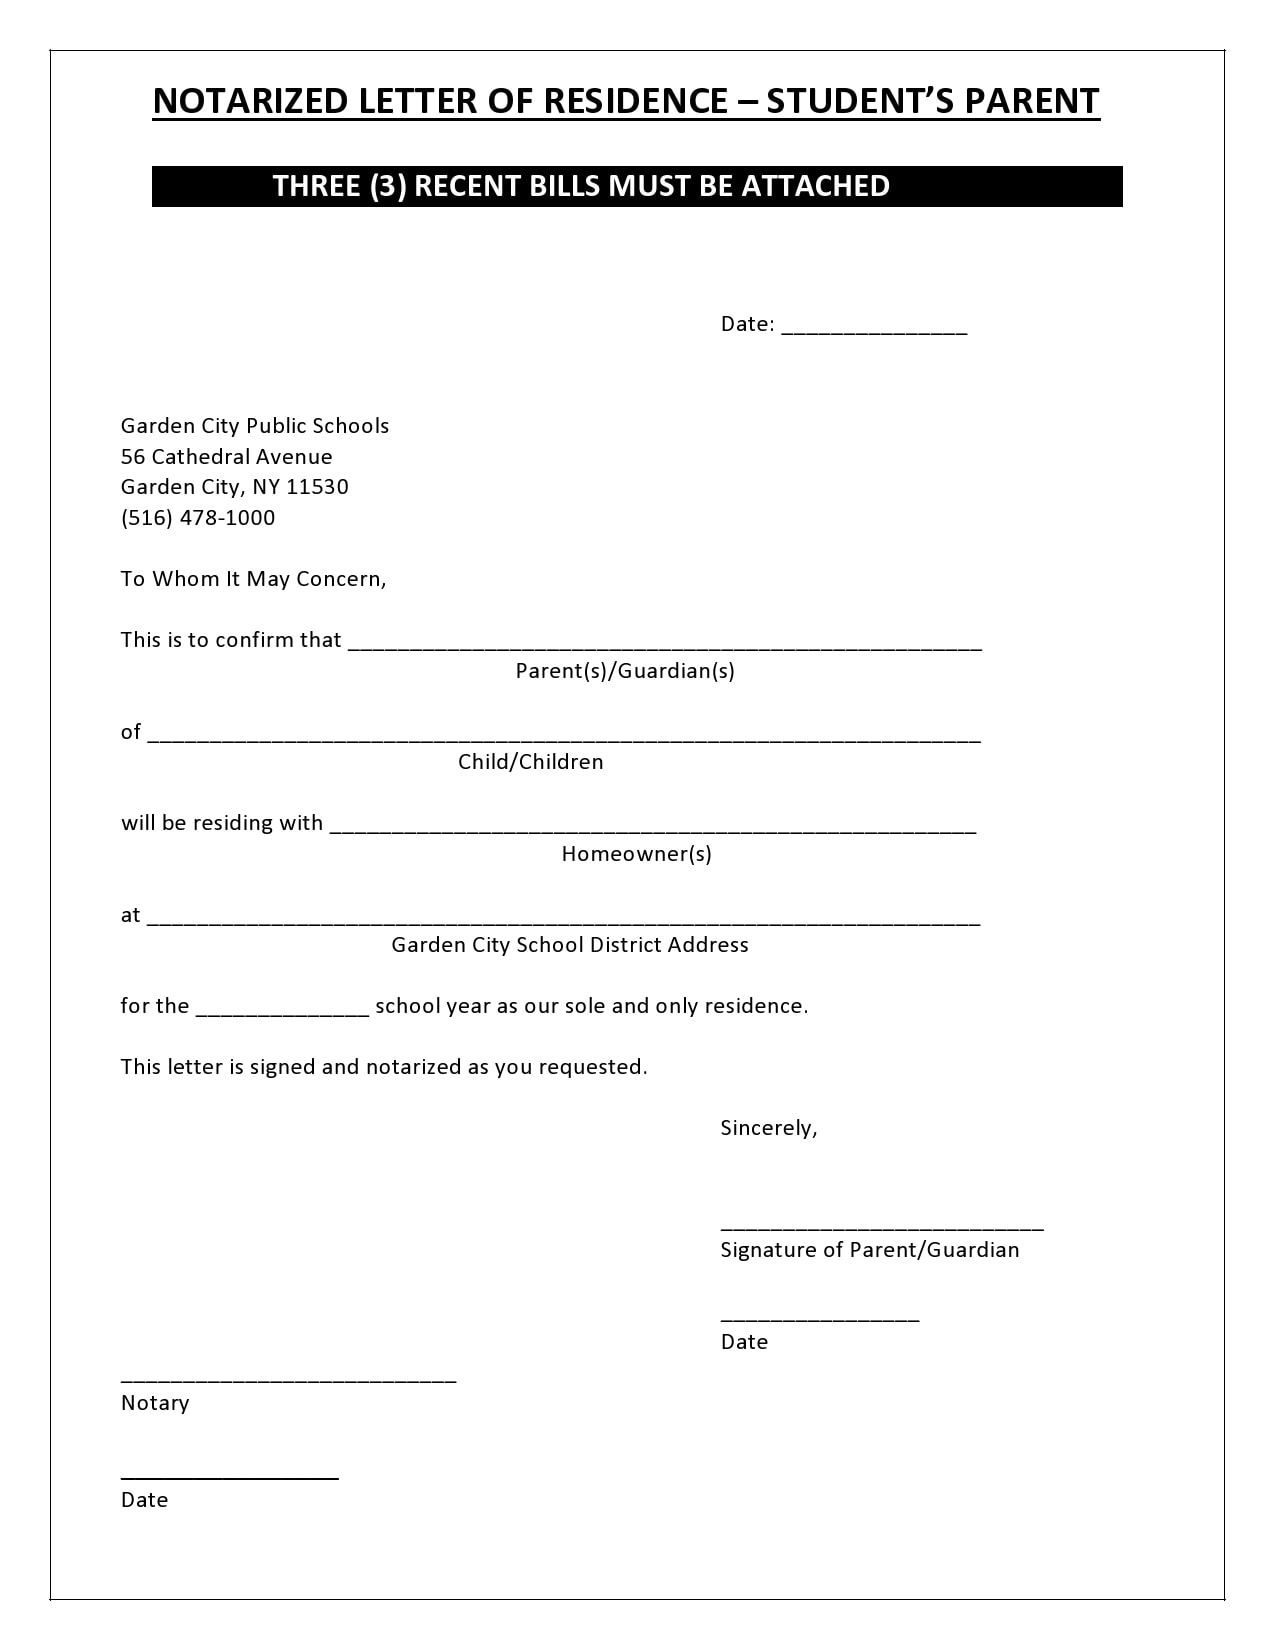 notarized letter template texas